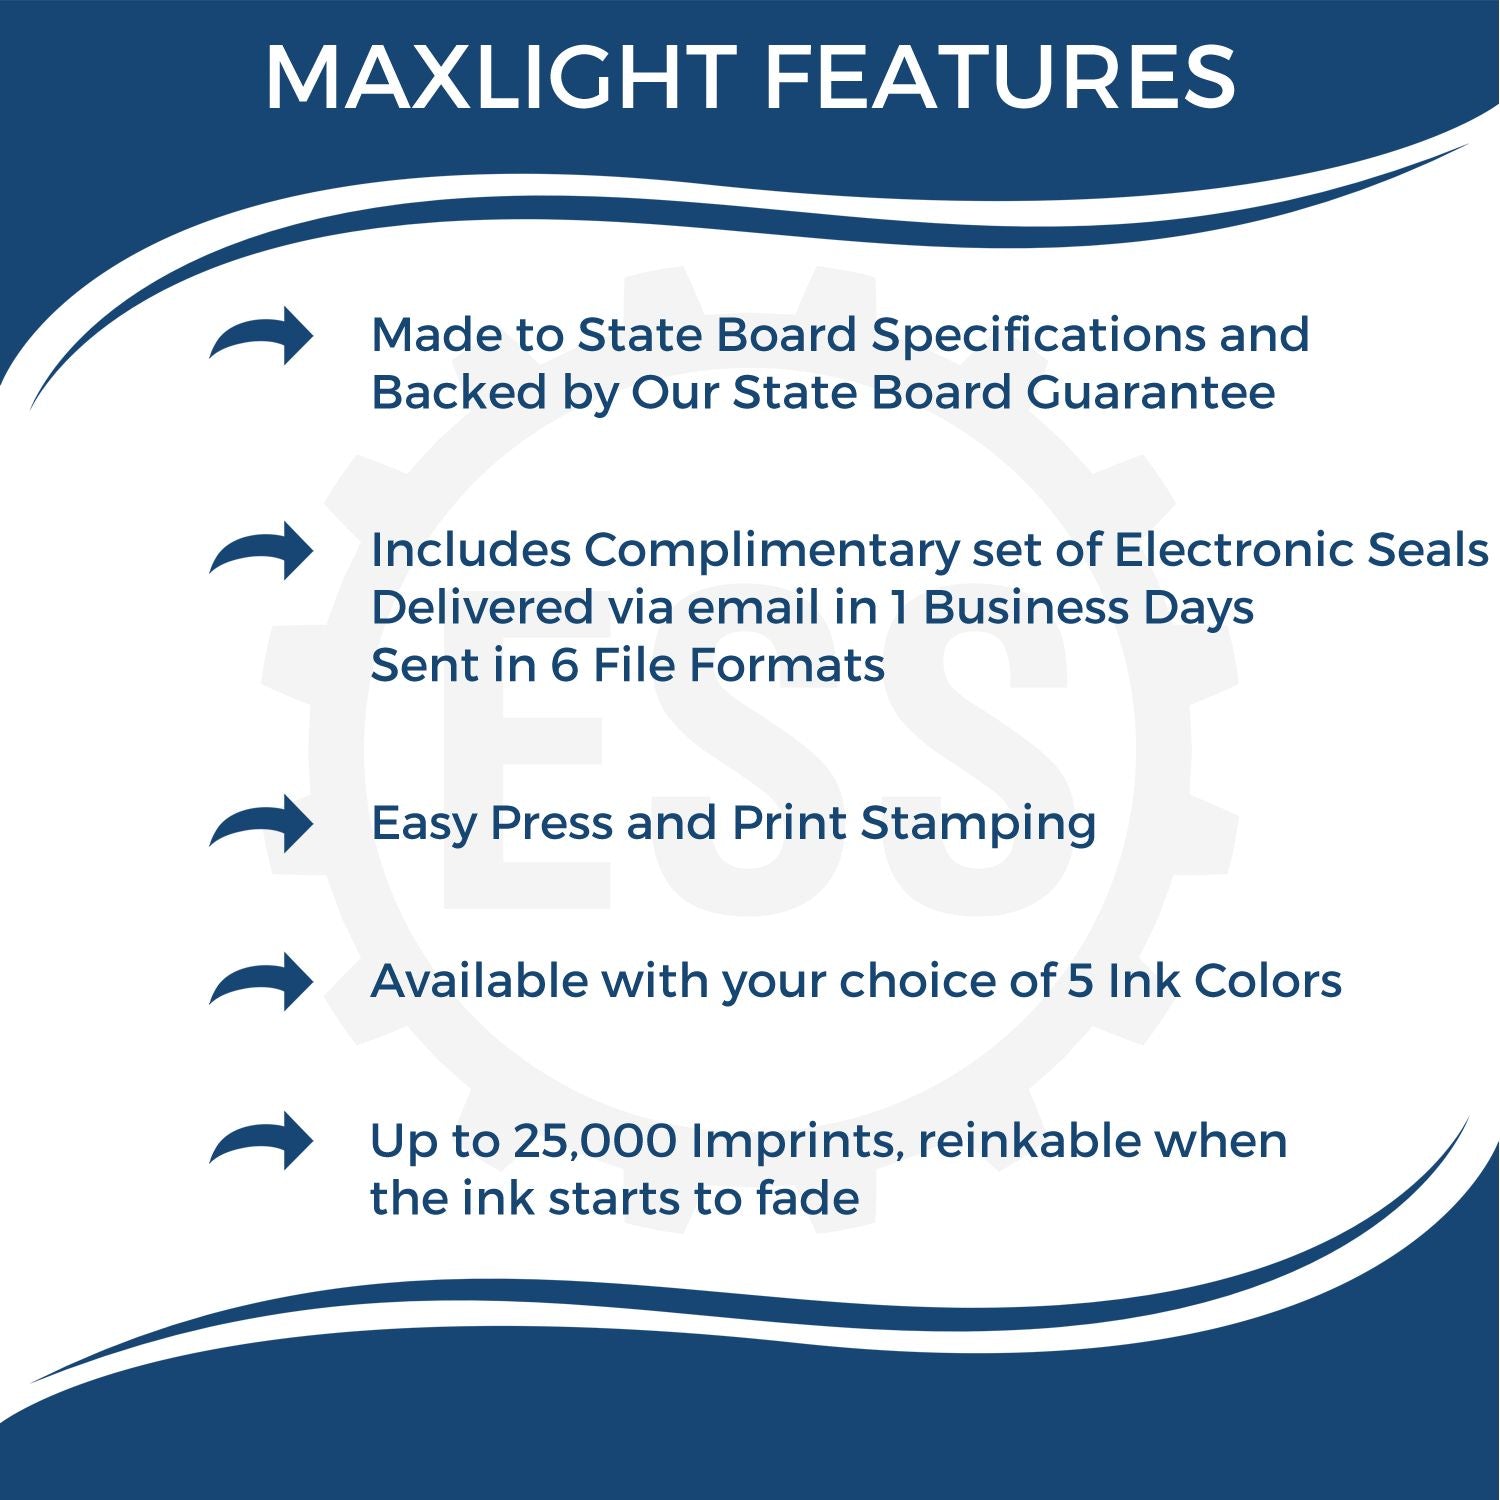 A picture of an infographic highlighting the selling points for the Premium MaxLight Pre-Inked South Dakota Engineering Stamp